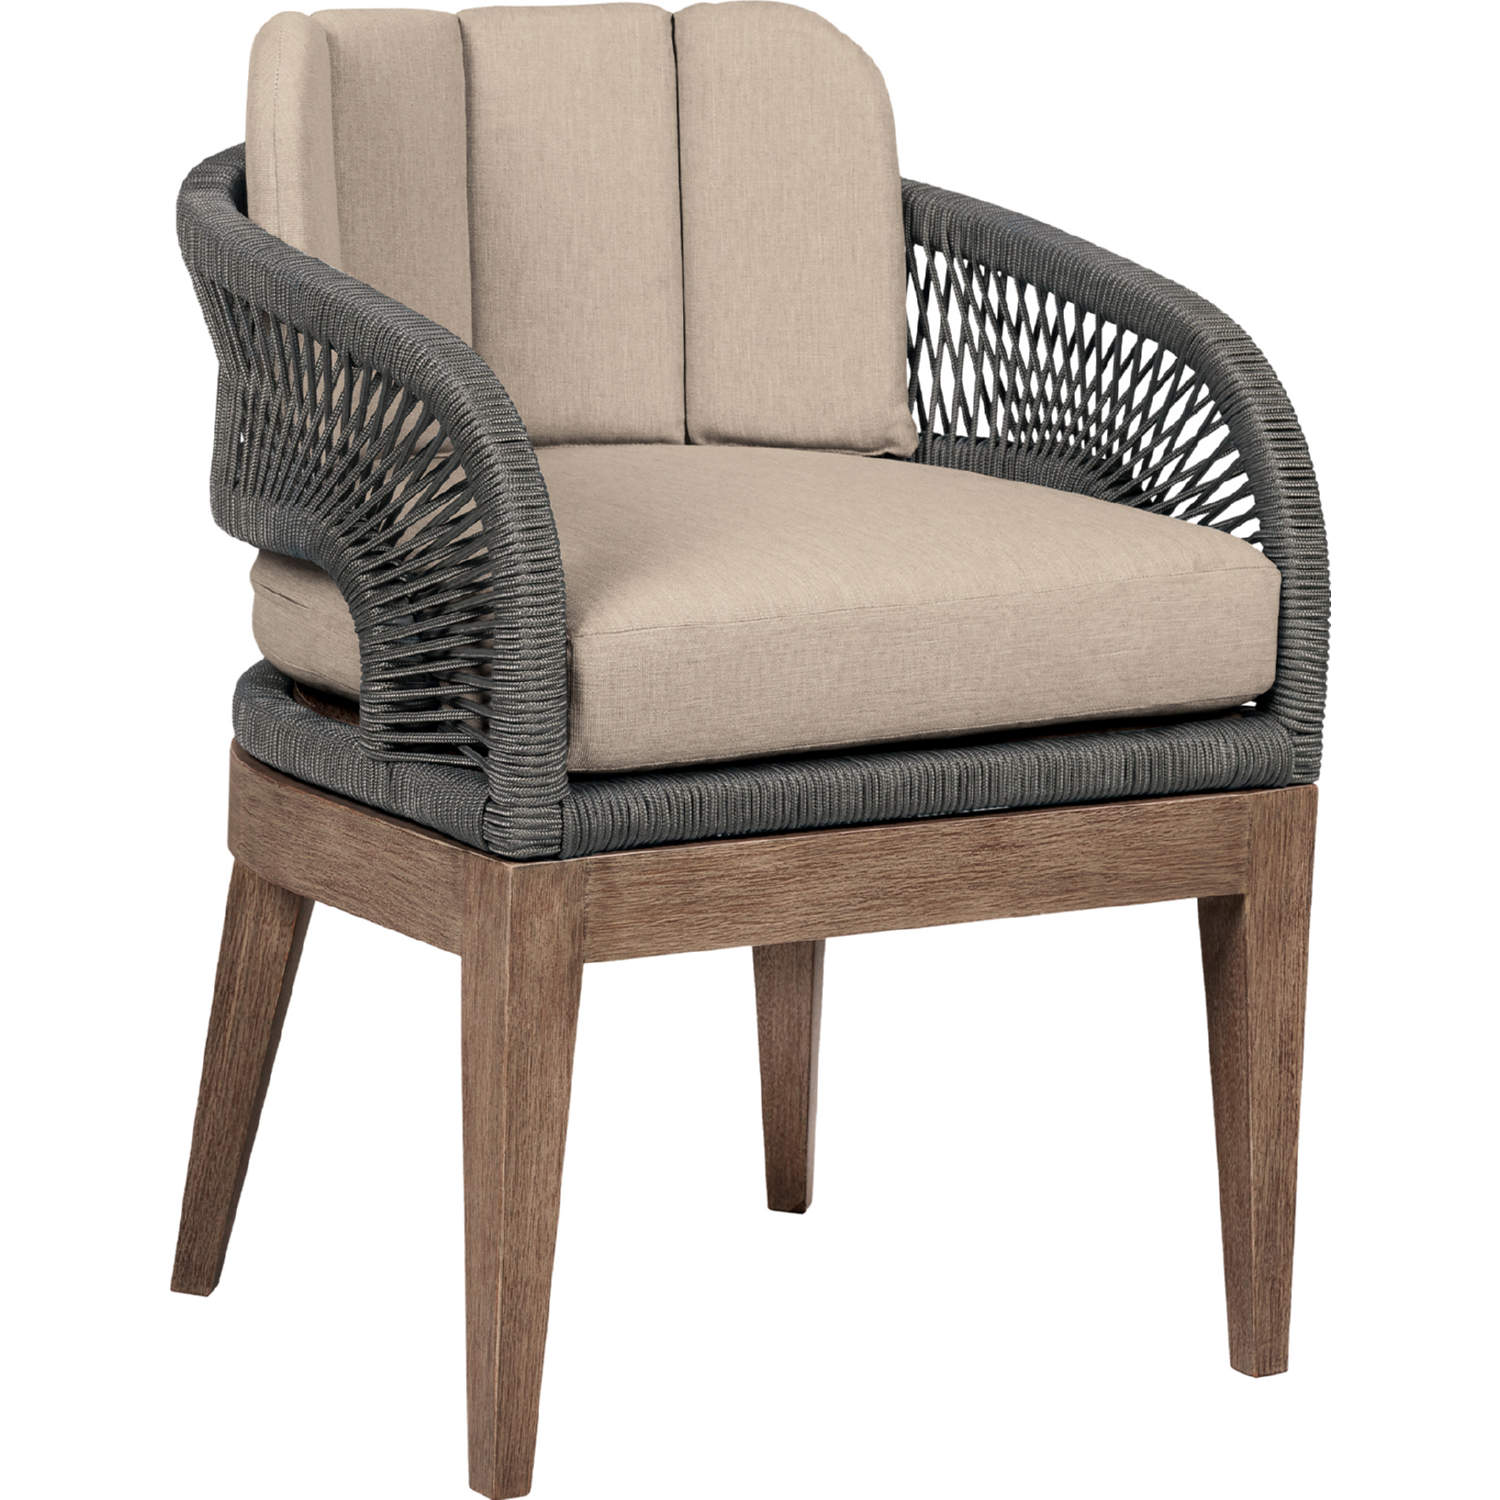 Armen LCORSIEUCTP Orbit Outdoor Dining Chair in Weathered